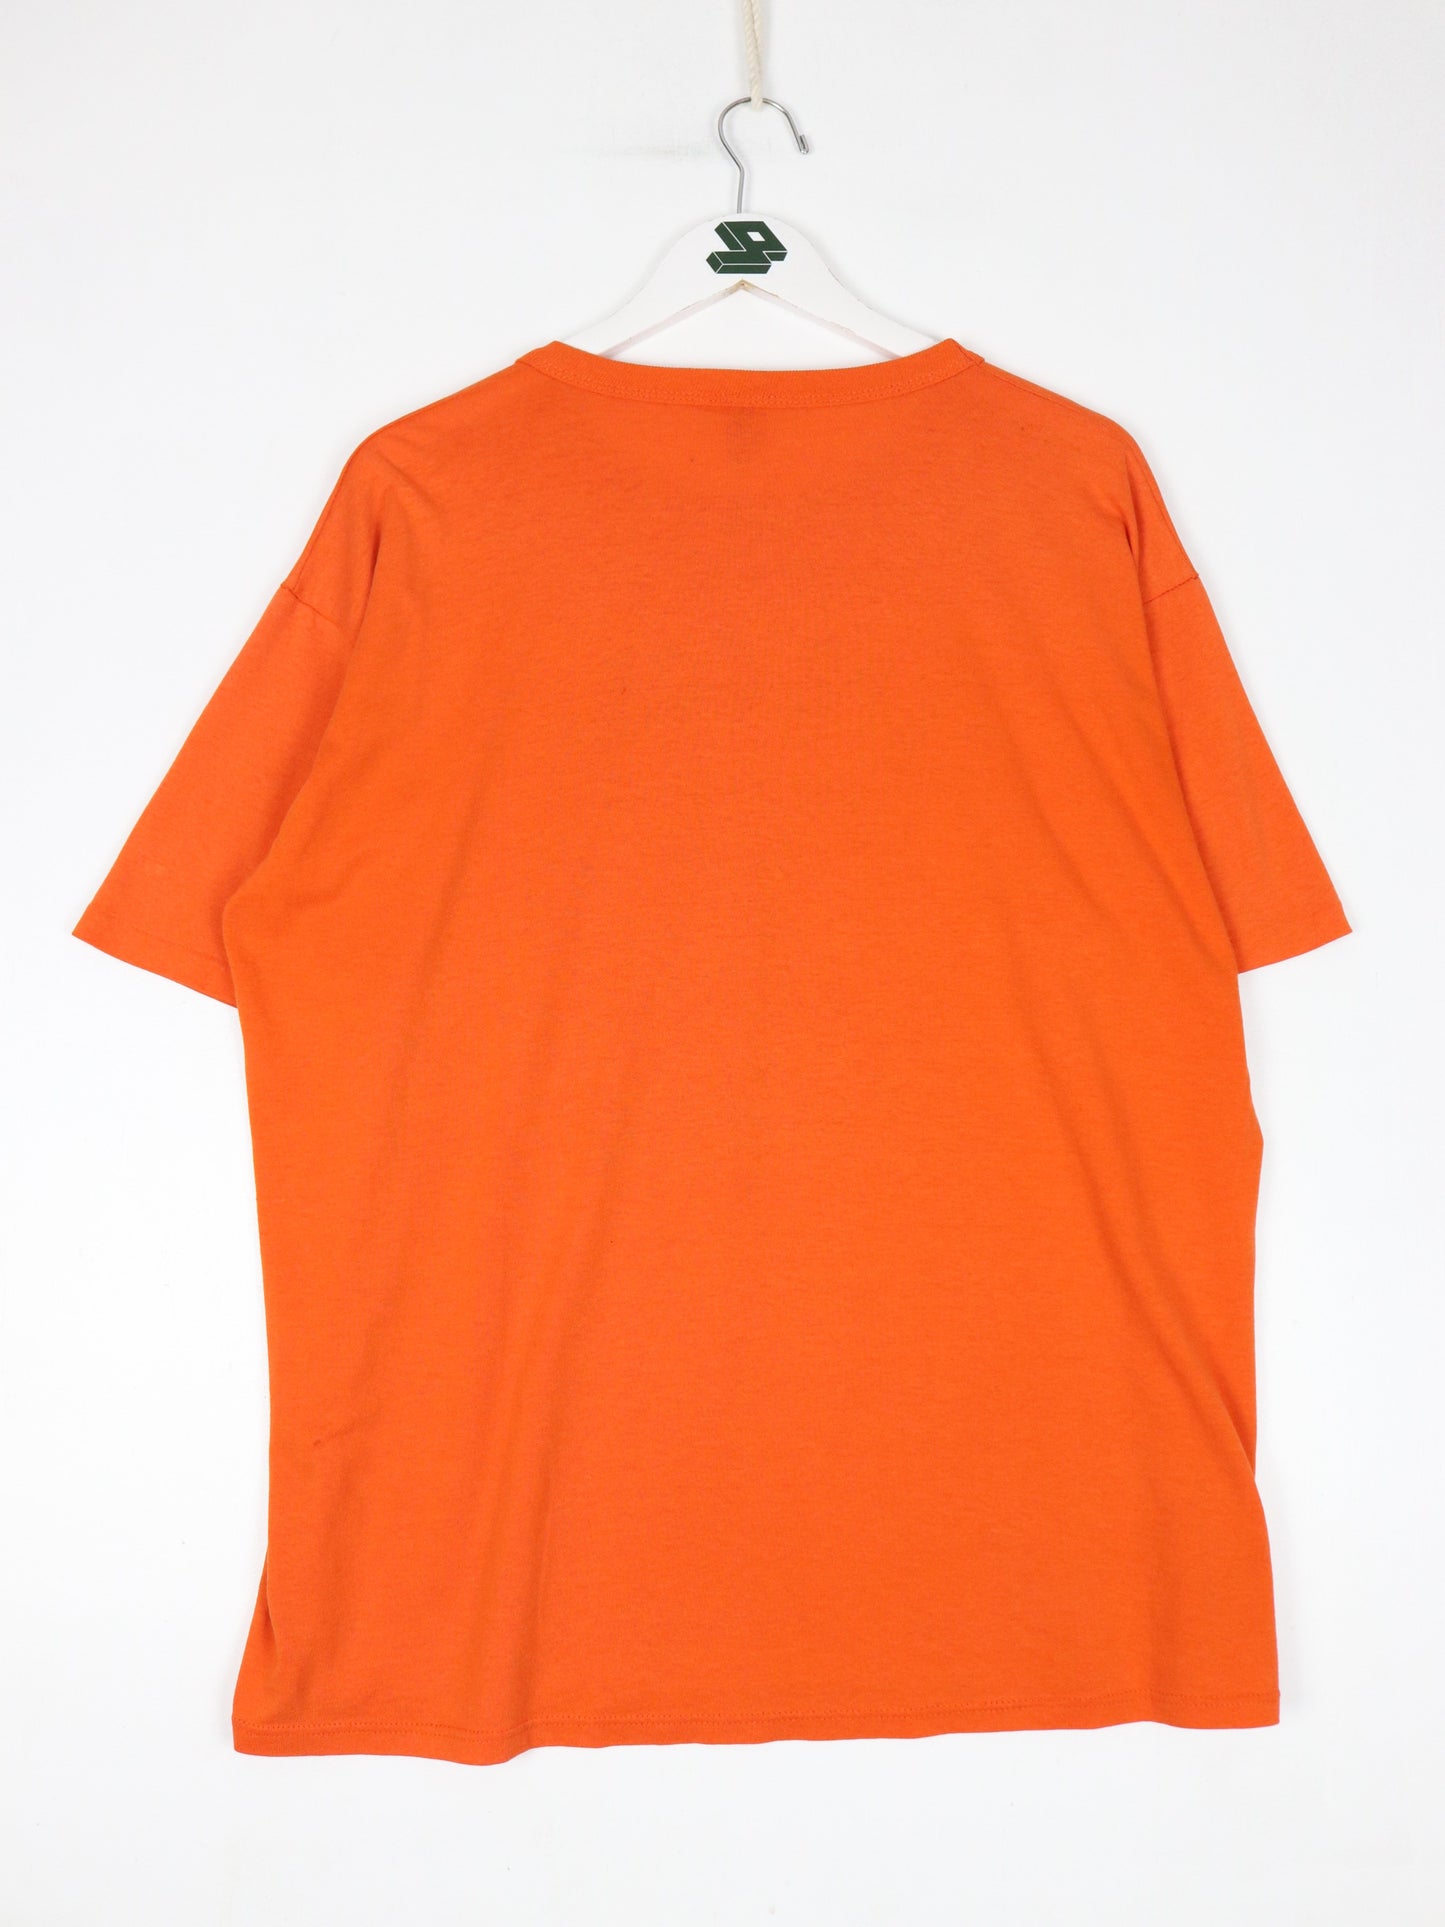 Vintage Cape Coral Basketball T Shirt Mens XL Orange Russell Athletic